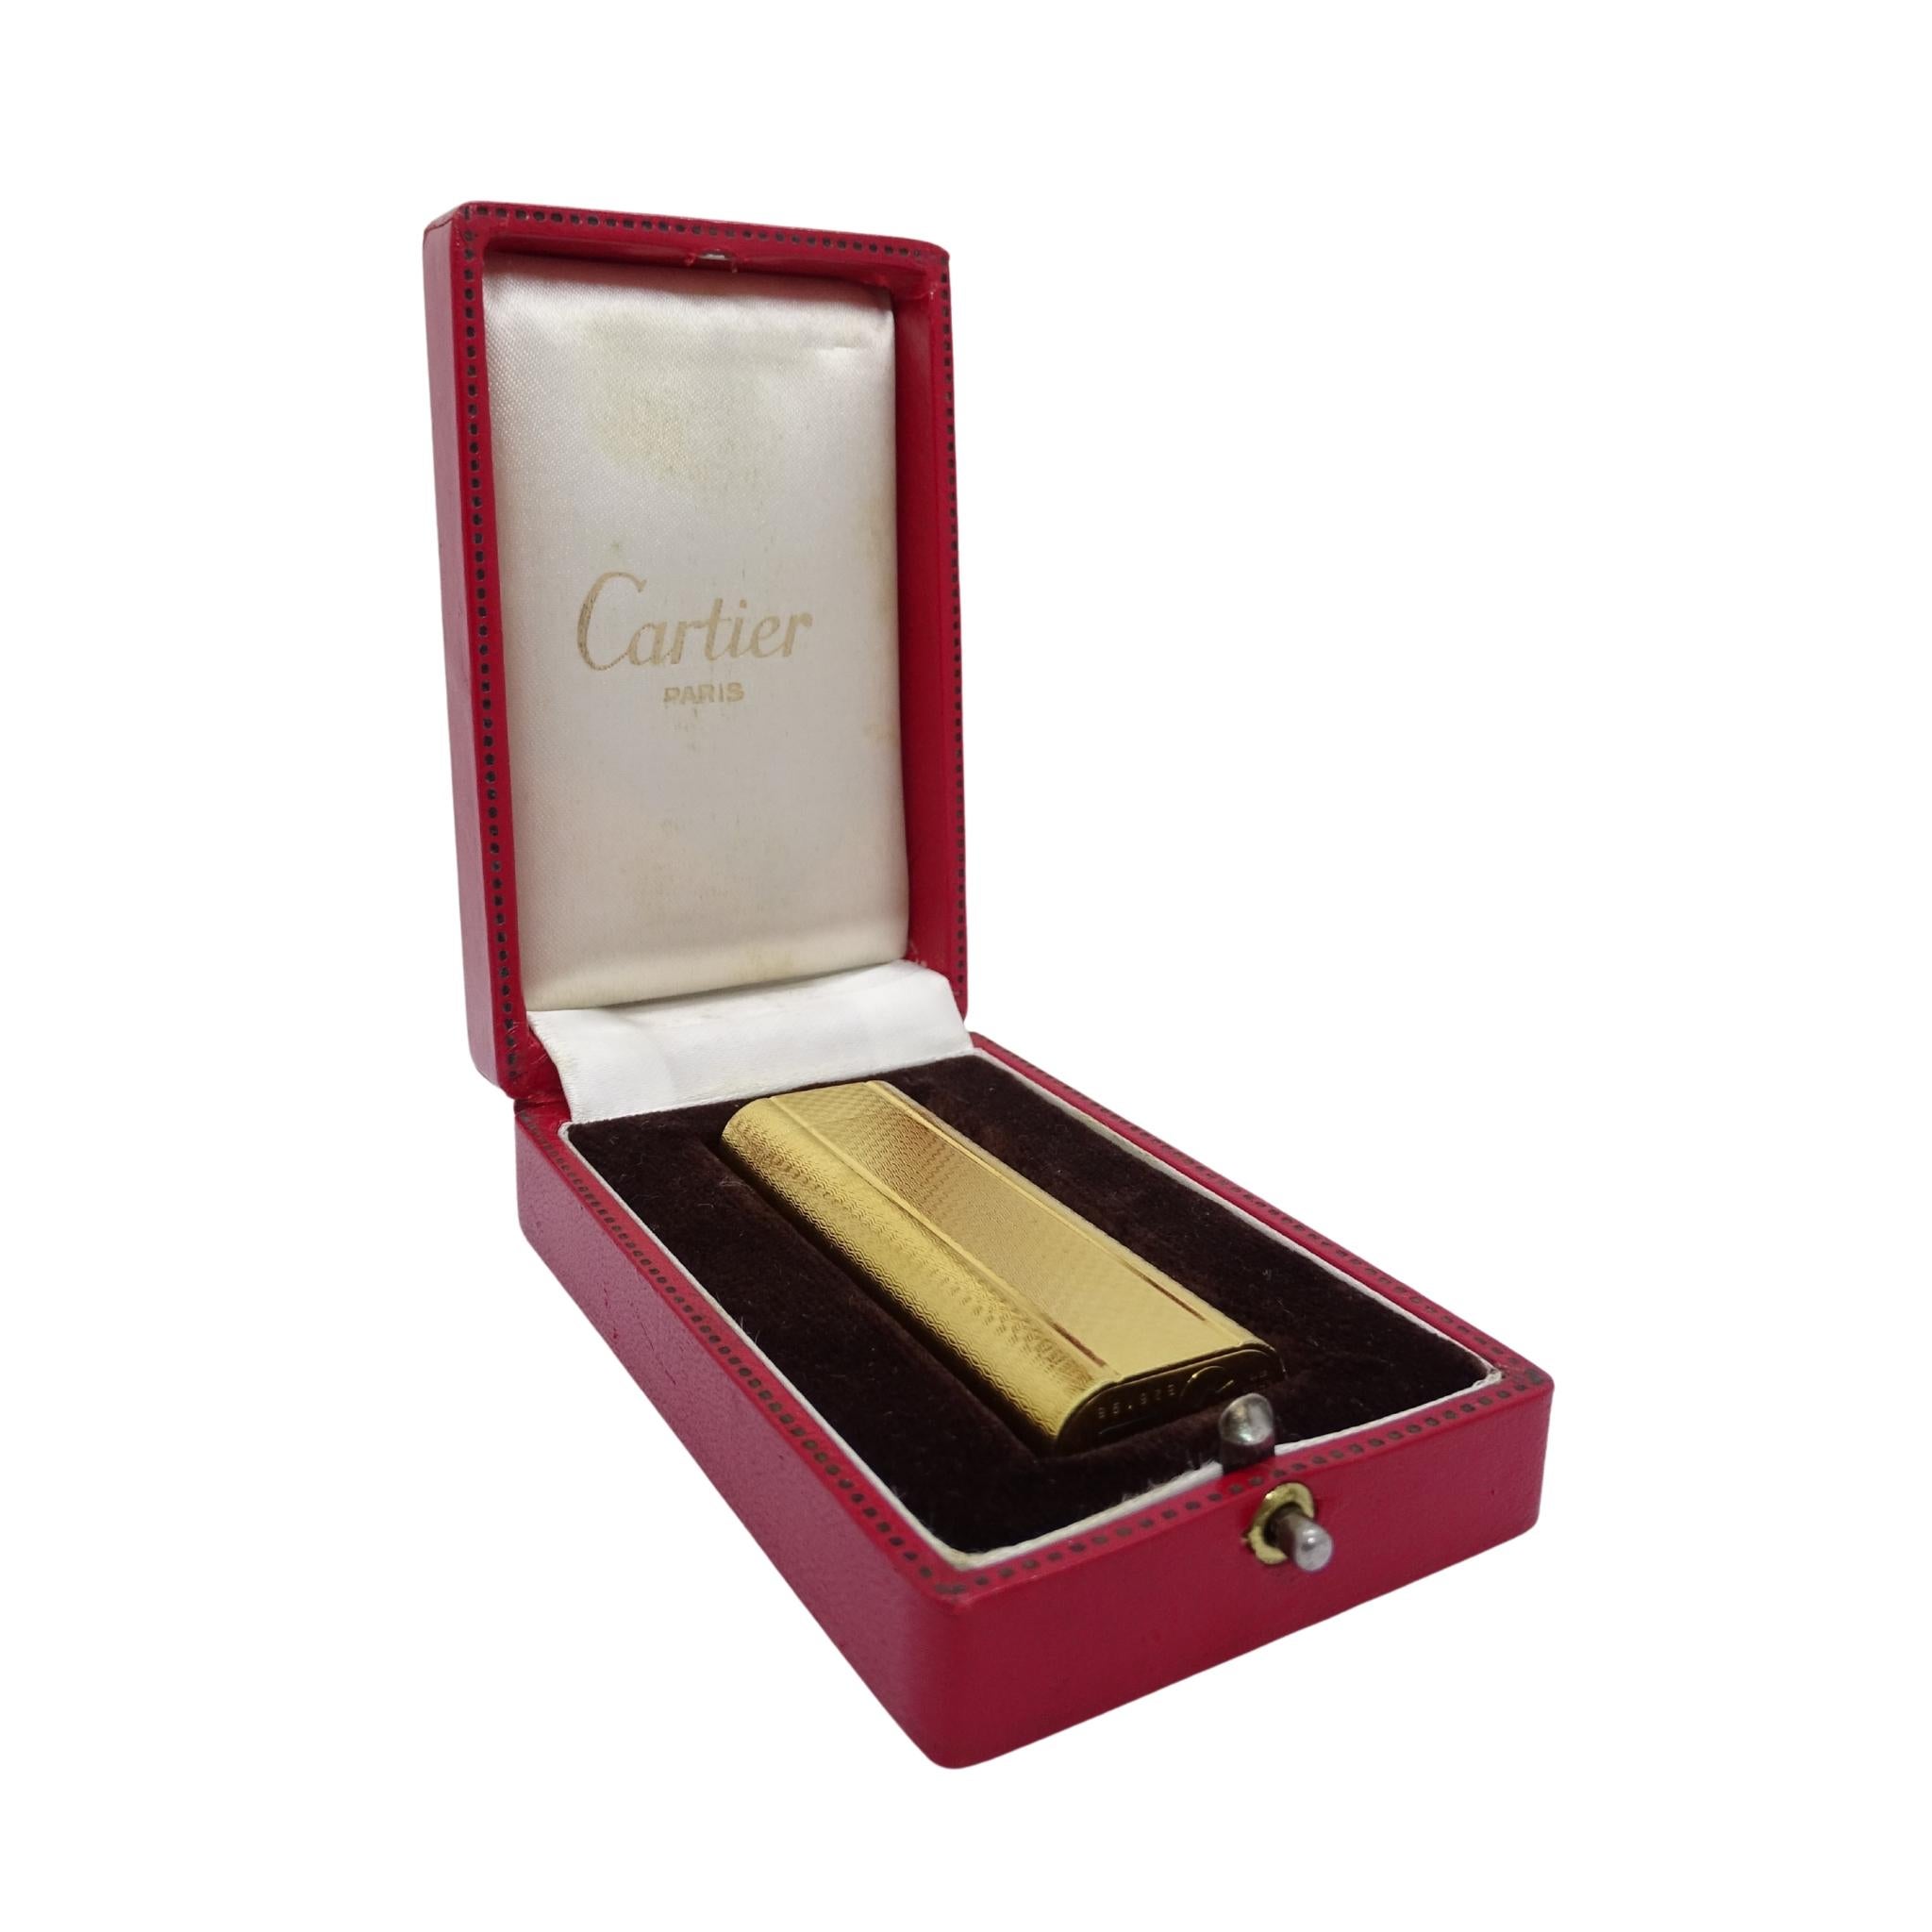 Cartier lighter with travel kit, gold plated, 90's - France In Good Condition For Sale In VALLADOLID, ES